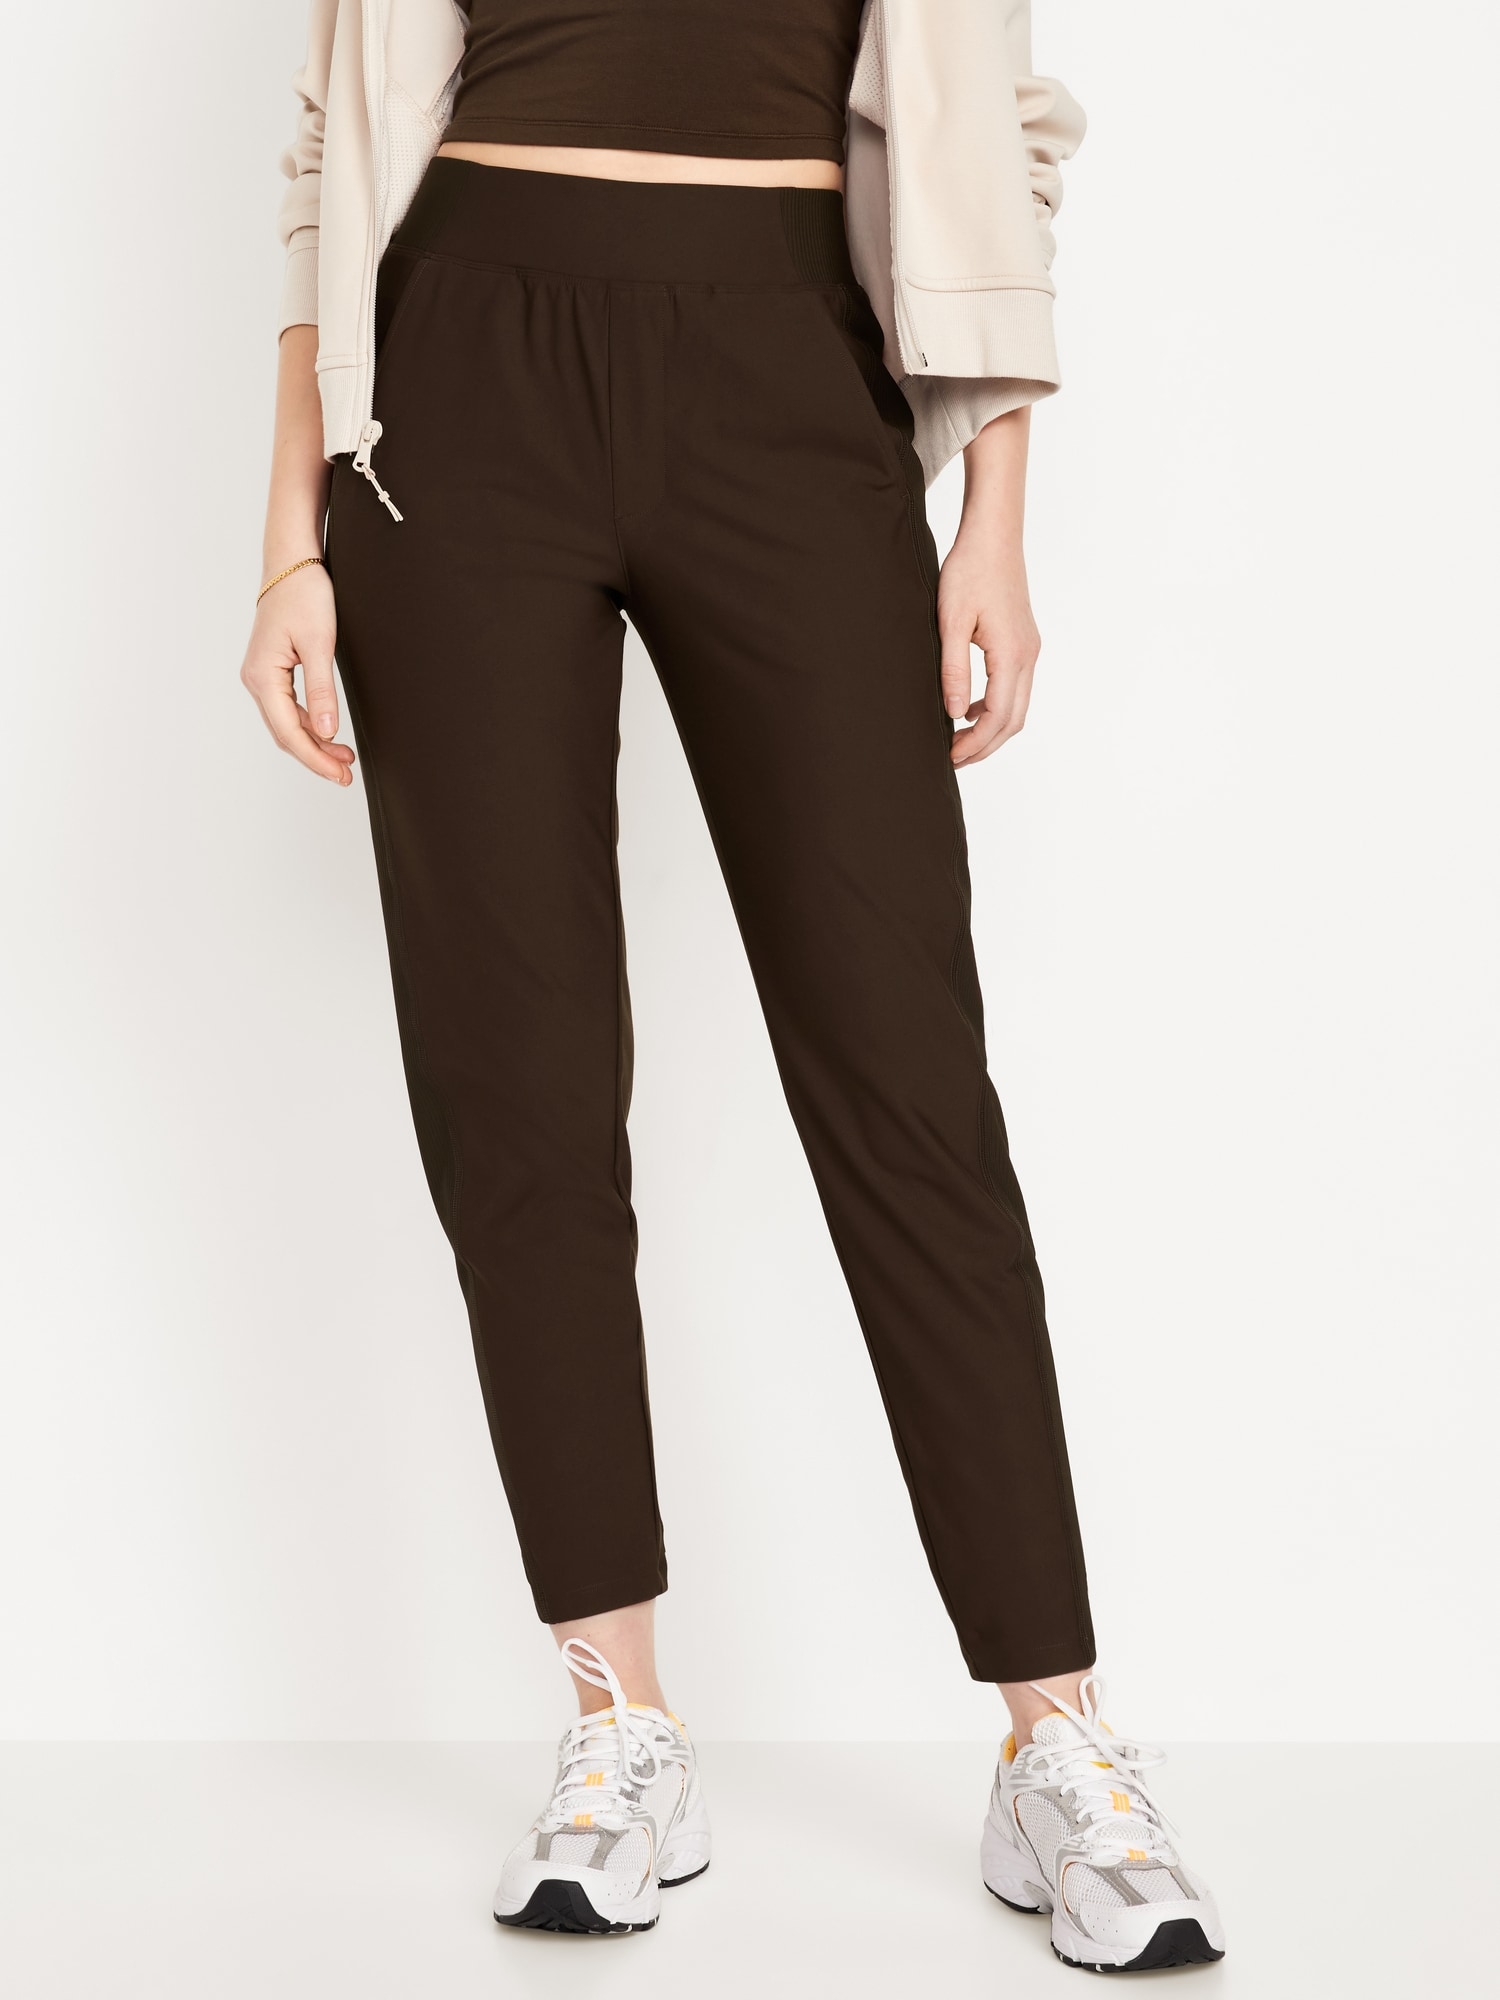 Denim & Co. Active French Terry Ankle Length Ruched Pants 